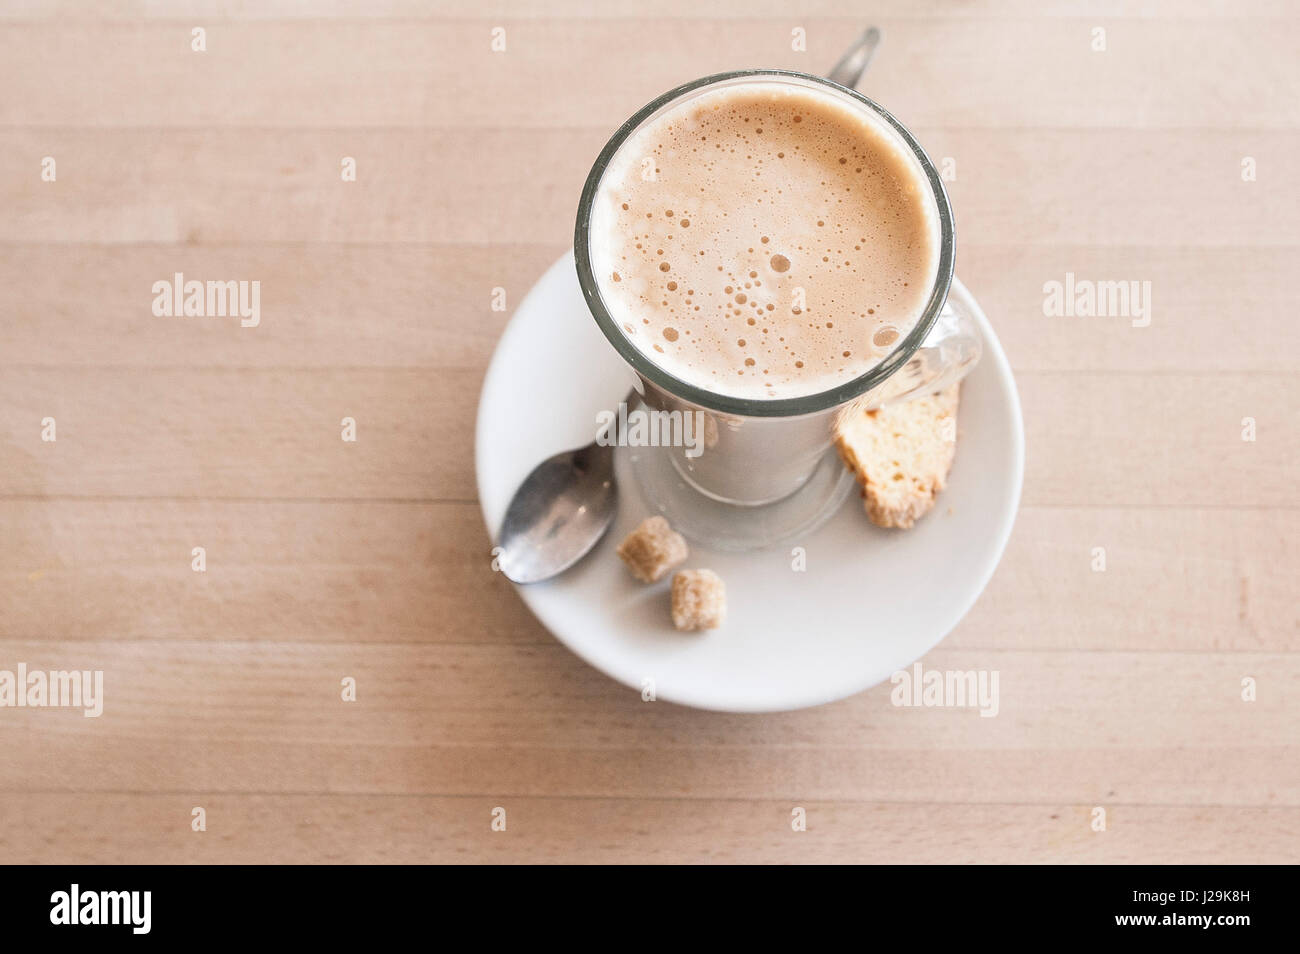 Latte coffee Sugar cubes Spoon Biscotti biscuit Cup Glass Coffee break Coffee time Refreshment Refreshing Interior Cafe Restaurant Stock Photo